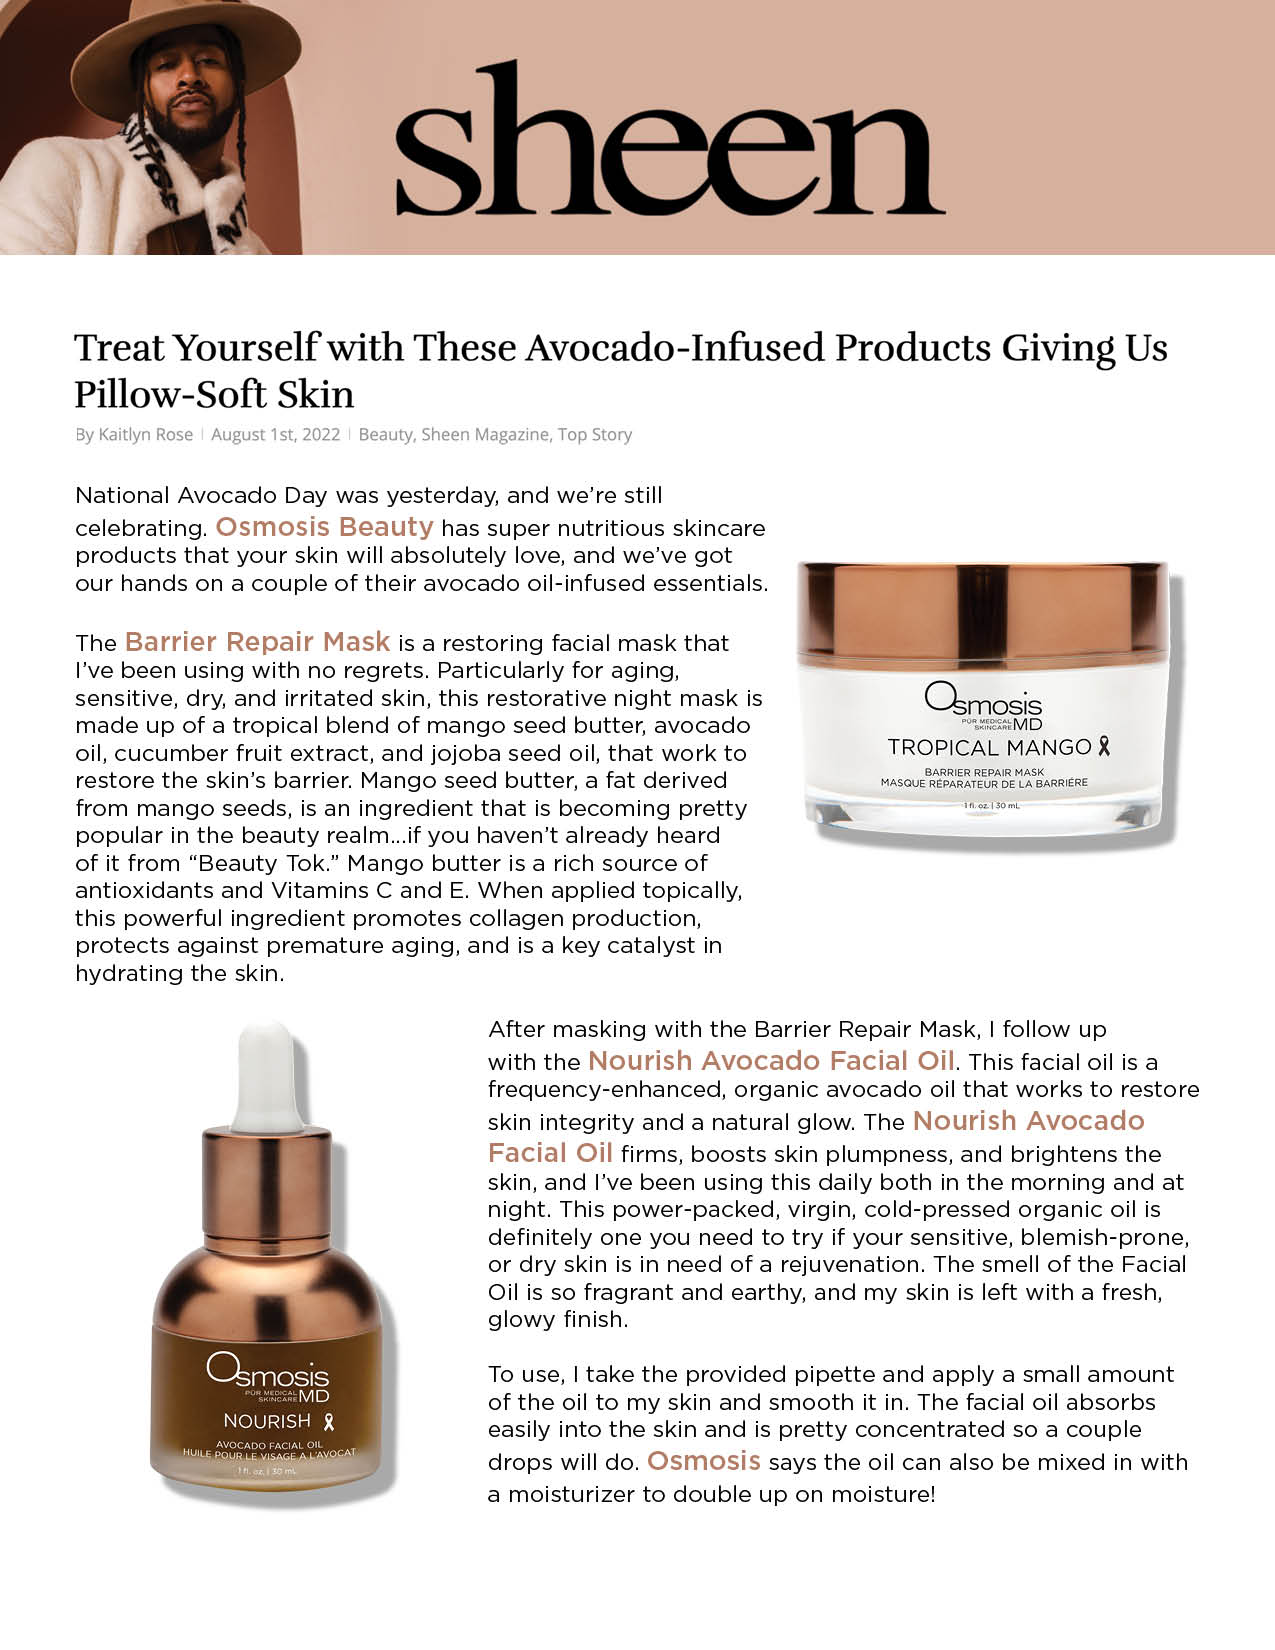 Sheen published their feature story/positive review on the Barrier Repair Mask and Nourish Avocado Facial Oil in their story, Treat Yourself with These Avocado-Infused Products Giving Us Pillow-Soft Skin, in honor of National Avocado Day.